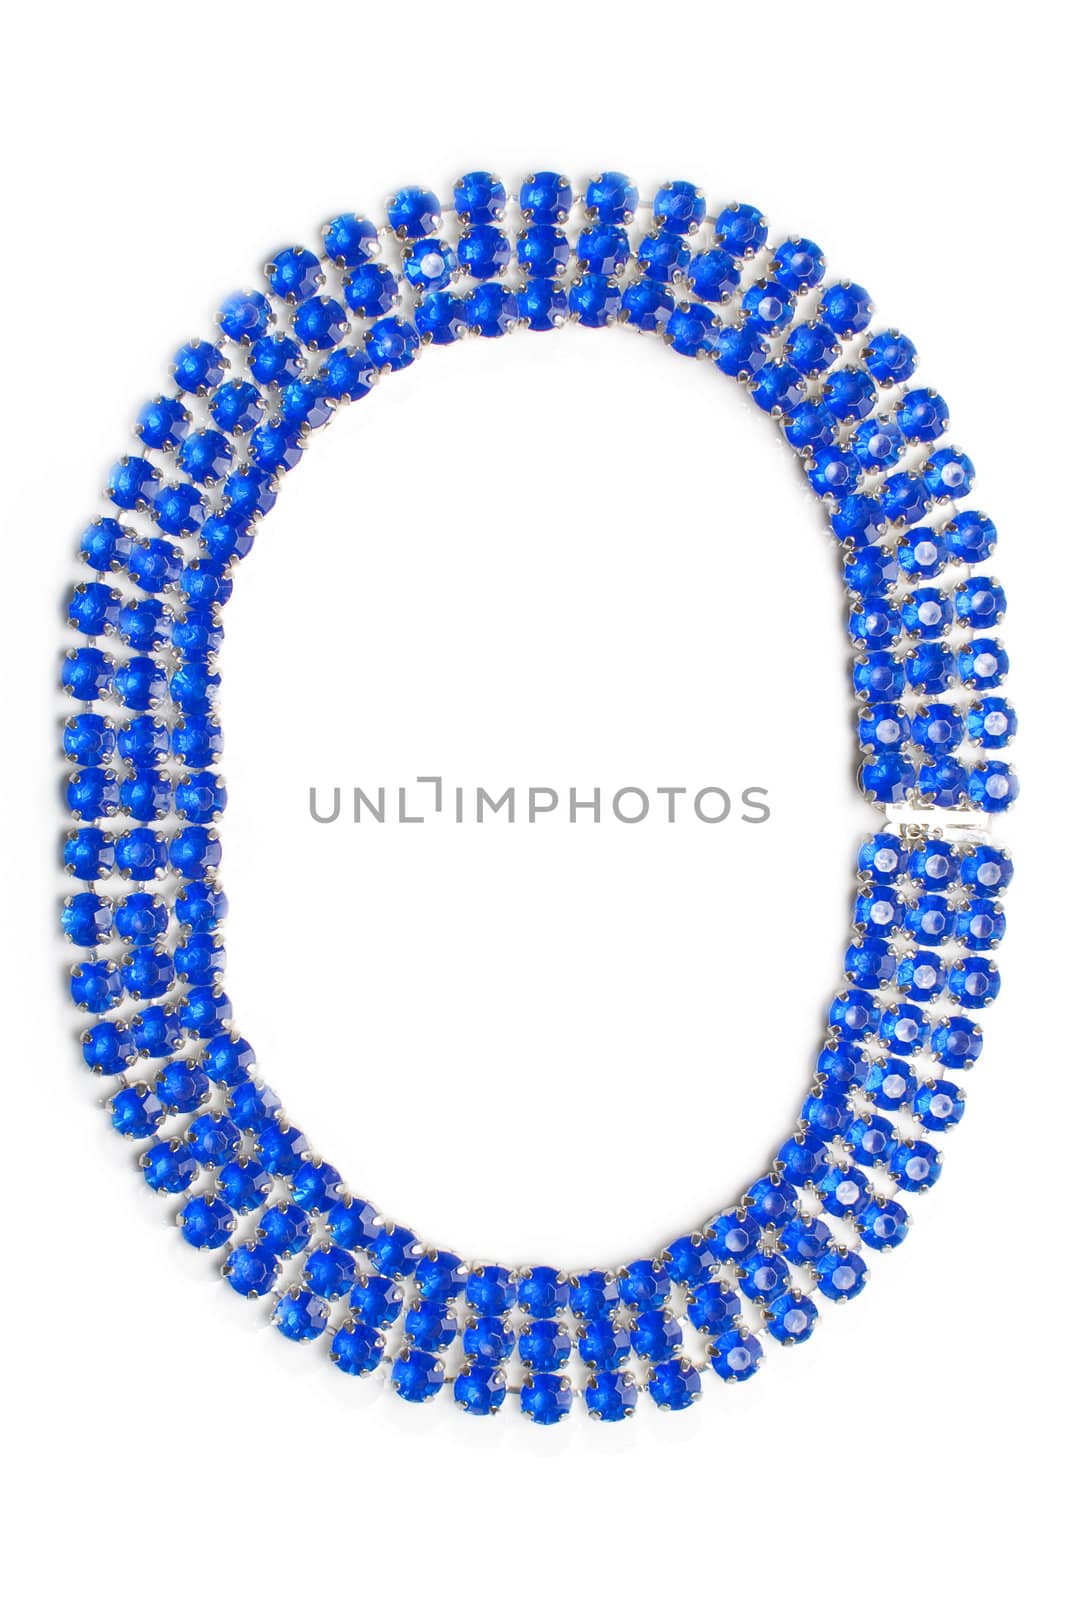 Circled bijouterie necklace made from silver metal and blue stones isolated on white background